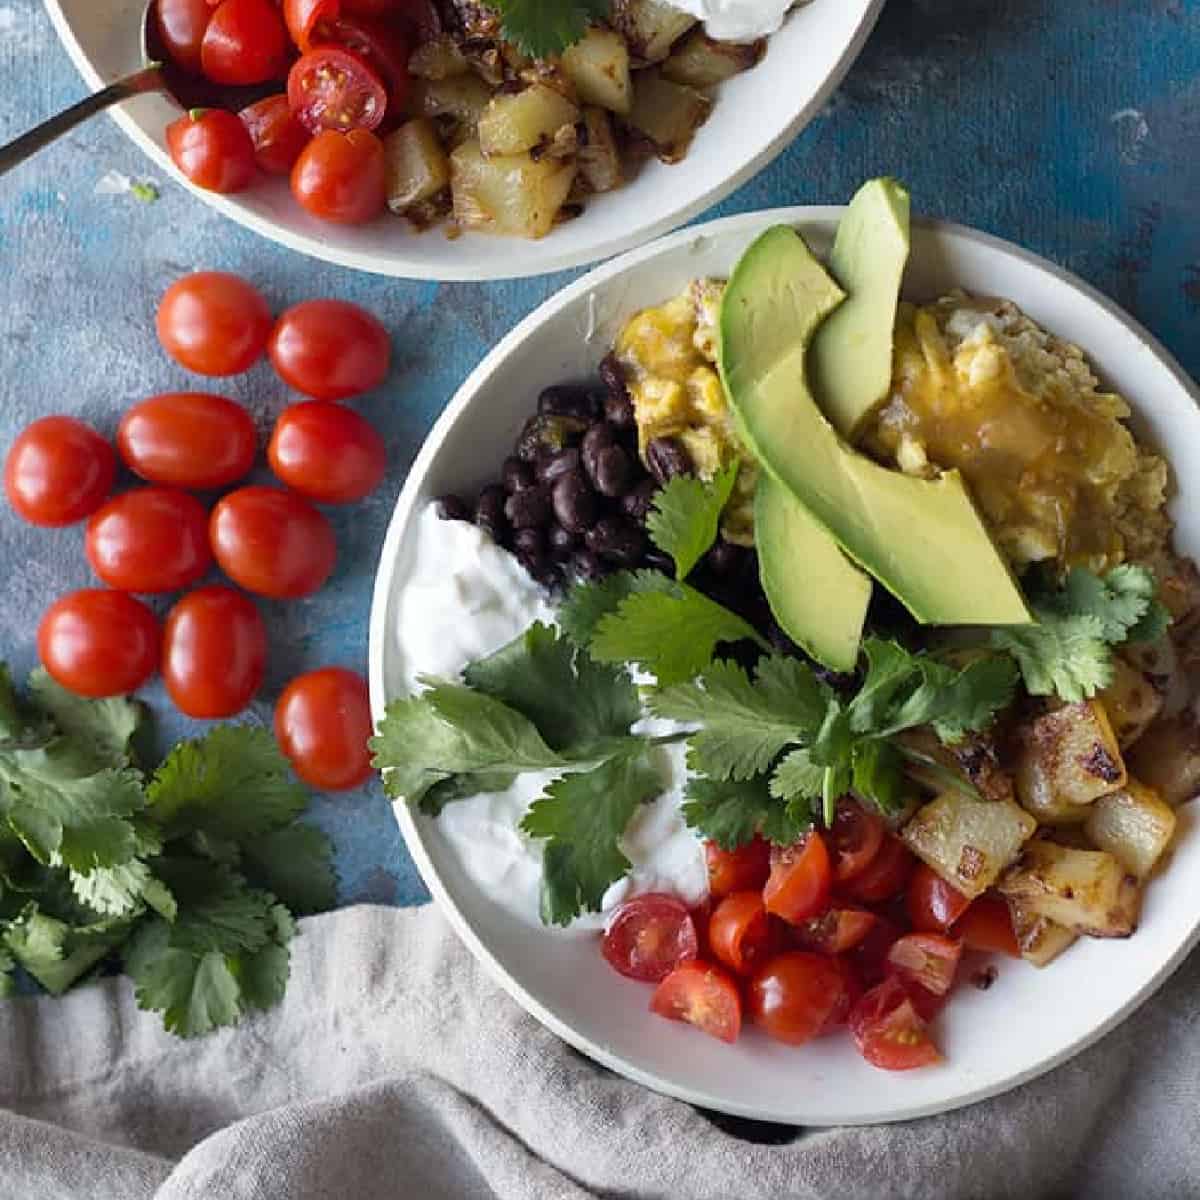 An easy and tasty Mexican-inspired breakfast bowl made with fresh ingredients. Delicious scrambled eggs and home fries make a tasty bowl with fresh avocado and tomatoes. 
